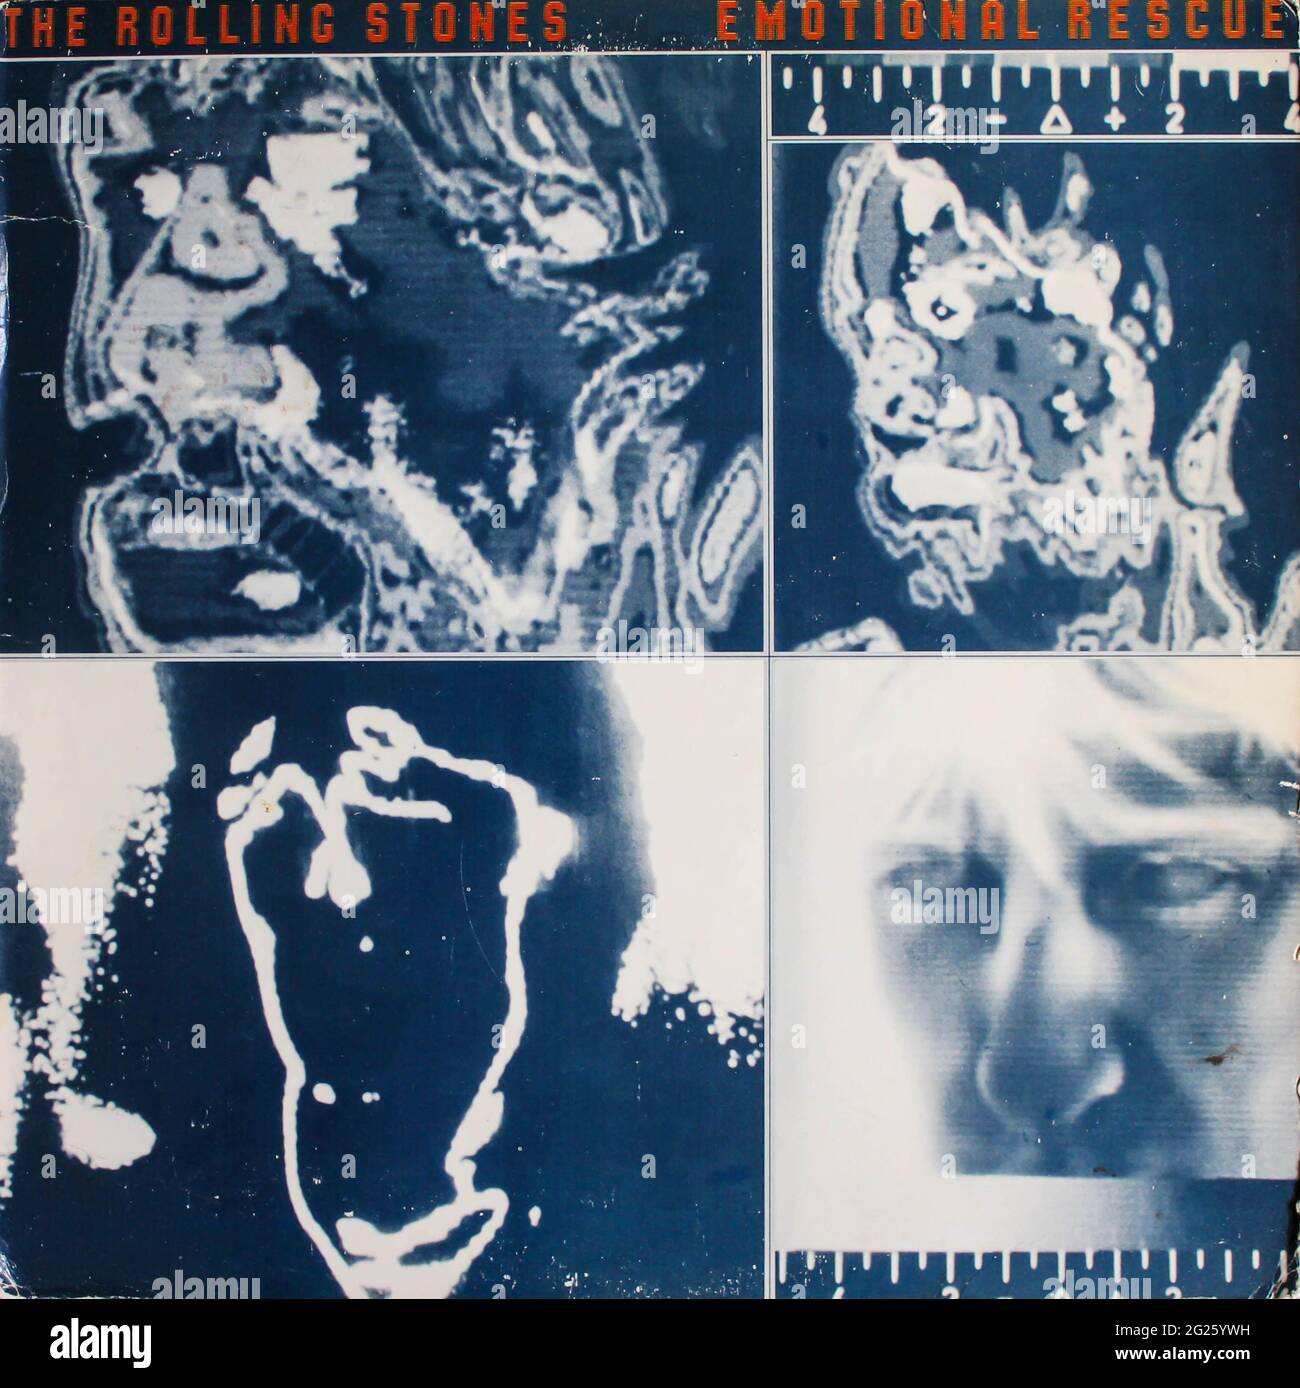 English rock band, The Rolling Stones music album on vinyl record LP disc. Titled: Emotional Rescue album cover Stock Photo